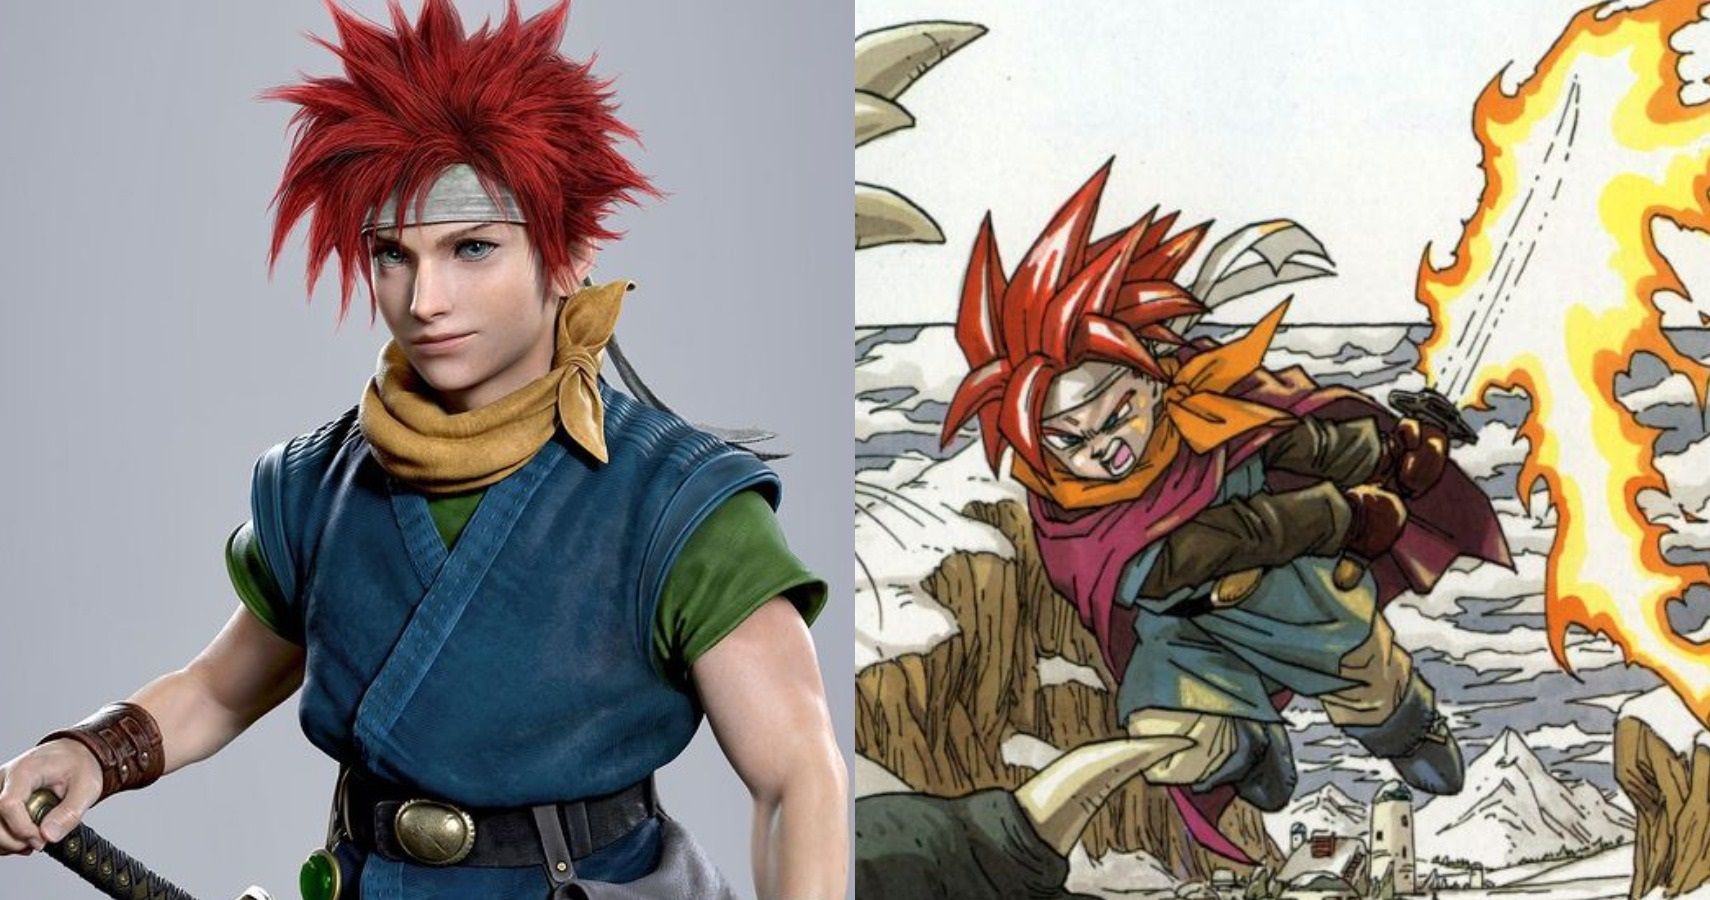 Incredible Chrono Trigger Fan Art Is A Glimpse Of The Remake That Well Never Play